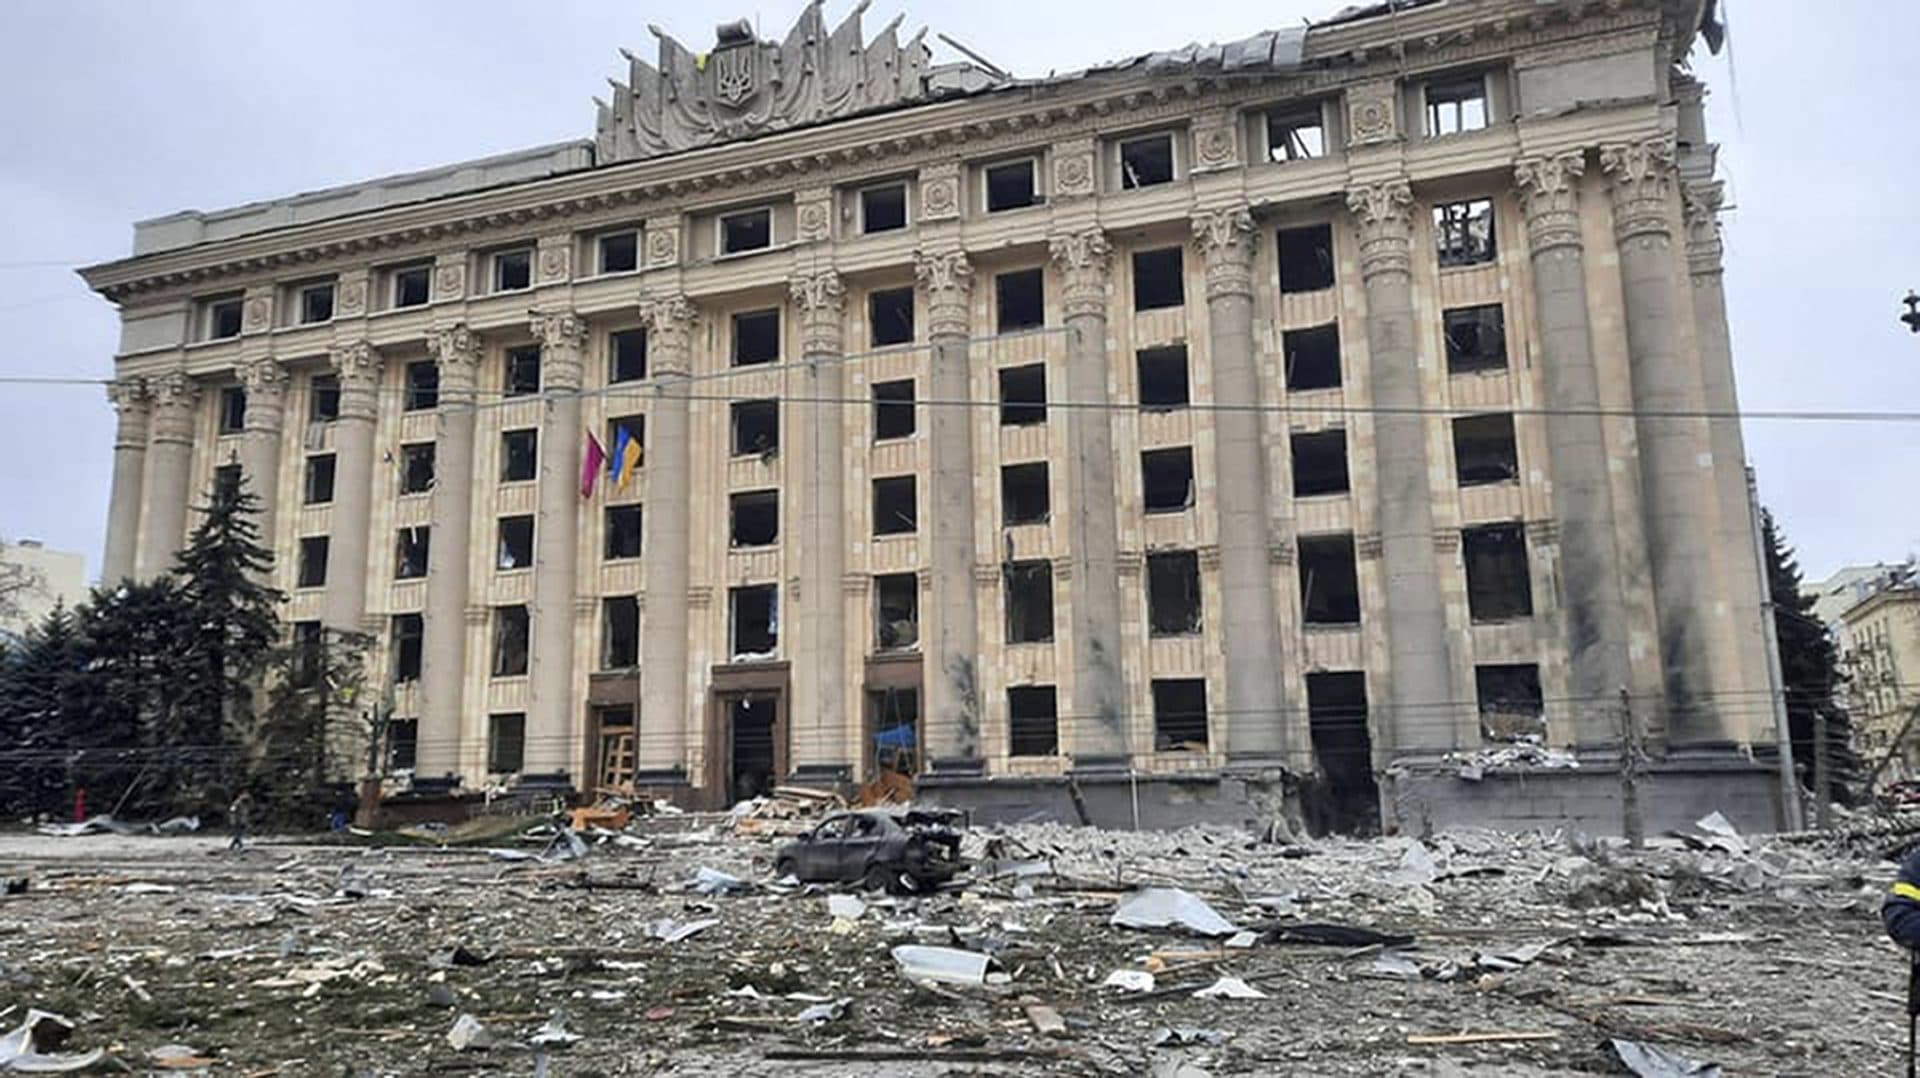 This handout photo released by Ukrainian Emergency Service shows a view of the damaged City Hall building in Kharkiv, Ukraine on March 1. (Ukrainian Emergency Service via AP)